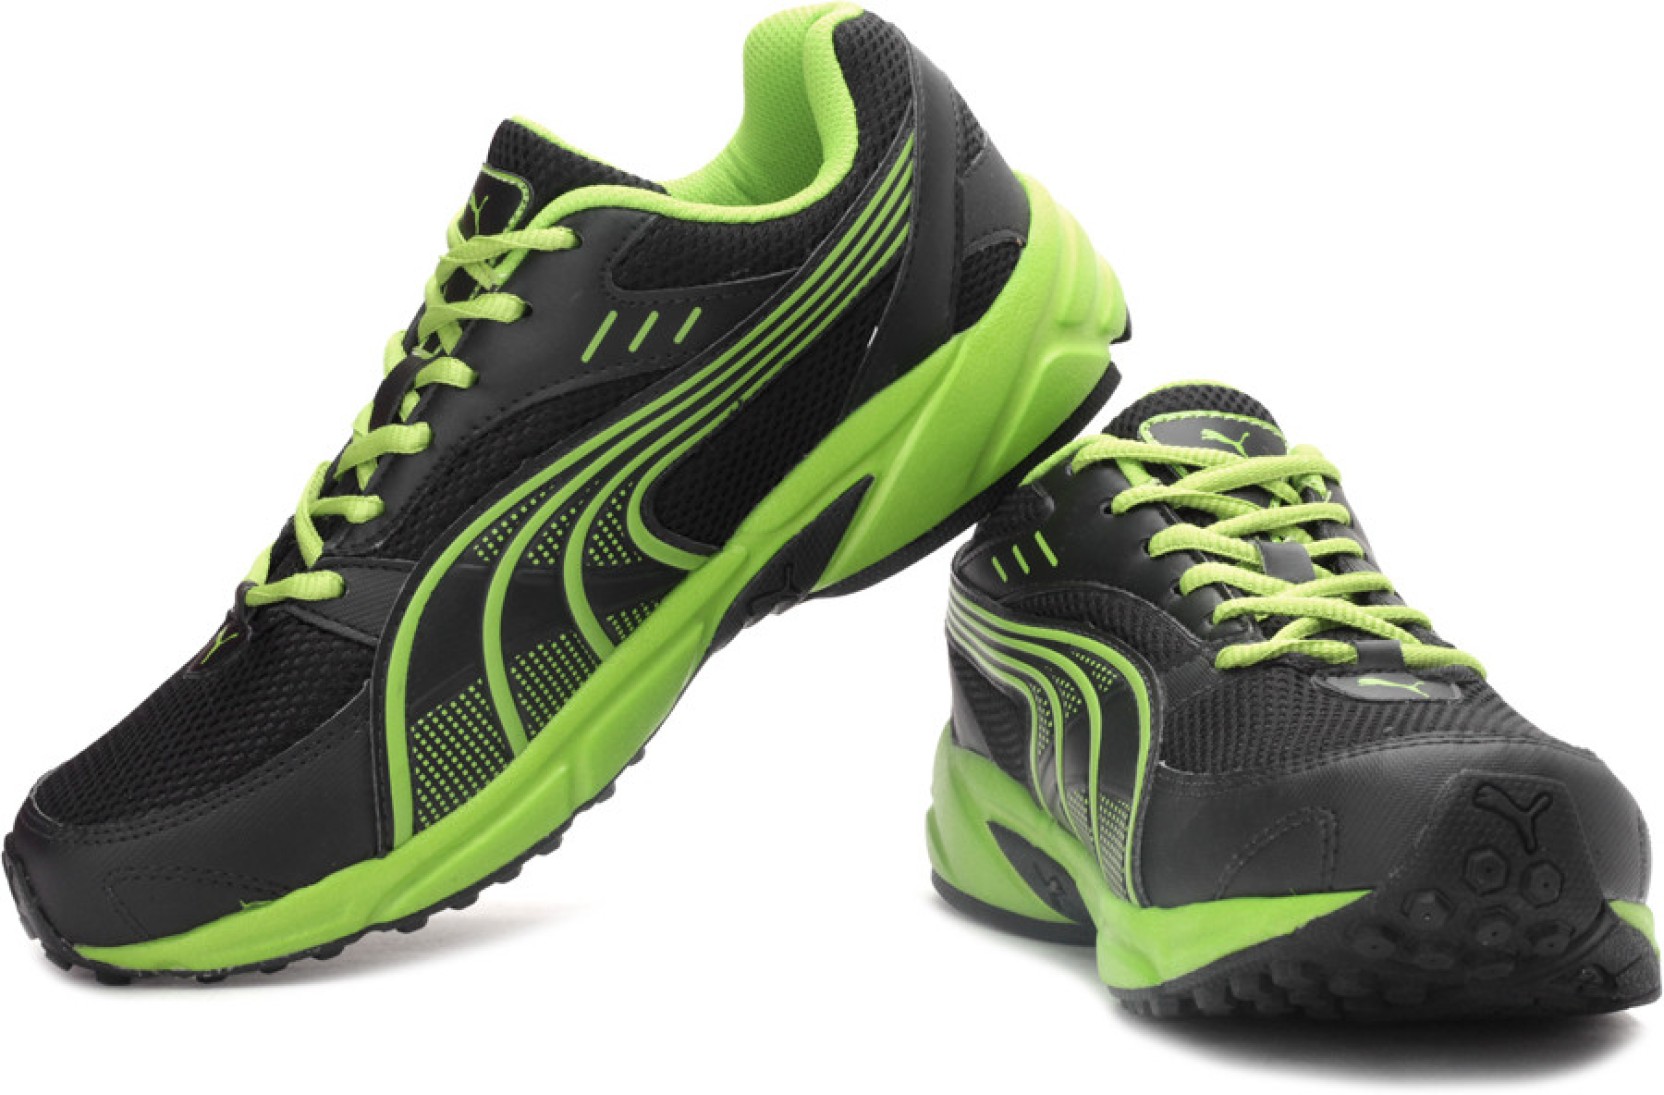 Puma Atom Fashion Ind. Running Shoes - Buy Black, Macaw Green Color ...